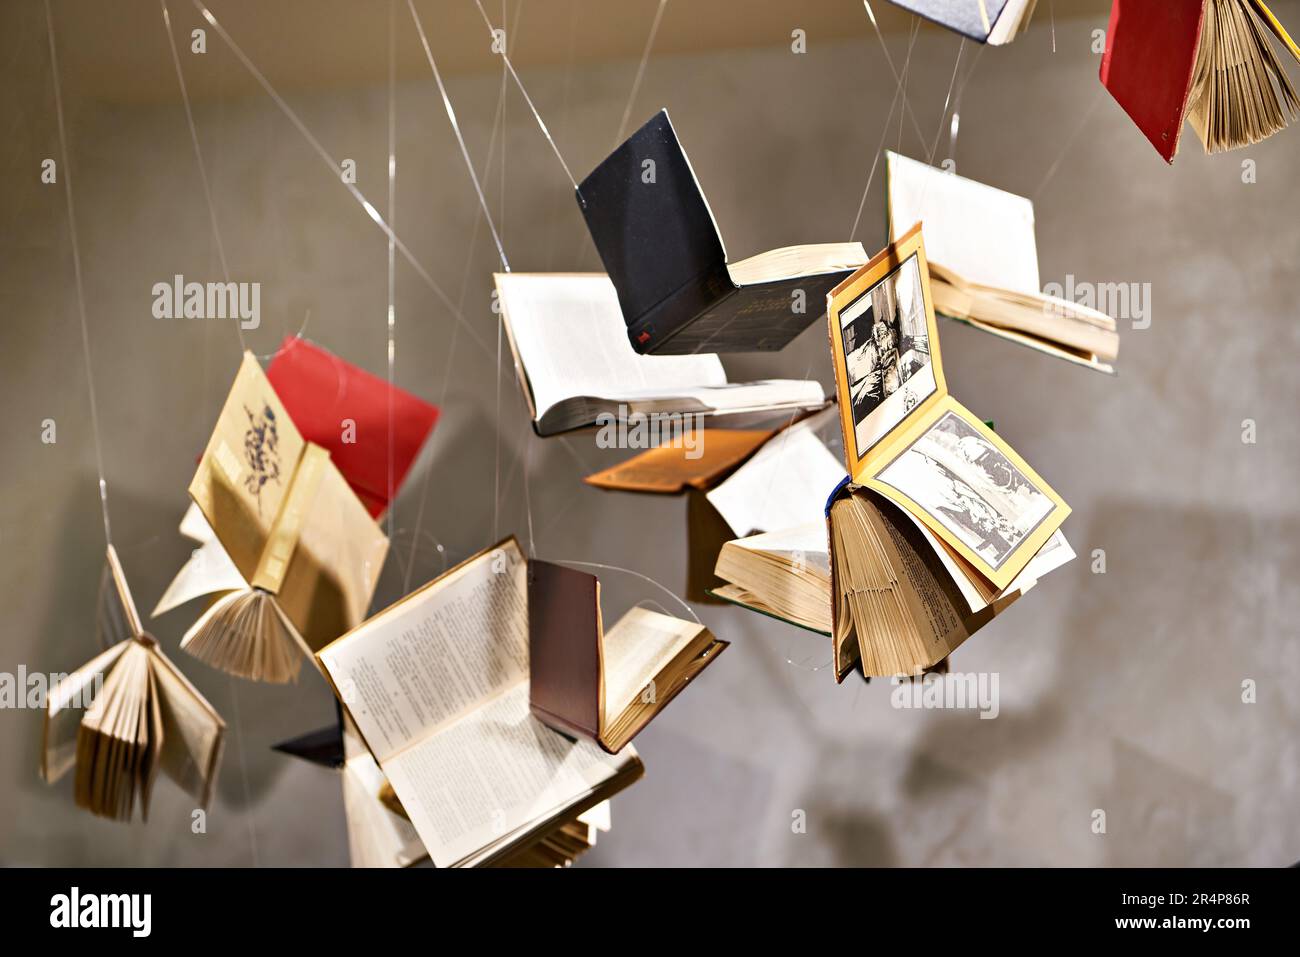 Books hanging in the air as an art object Stock Photo